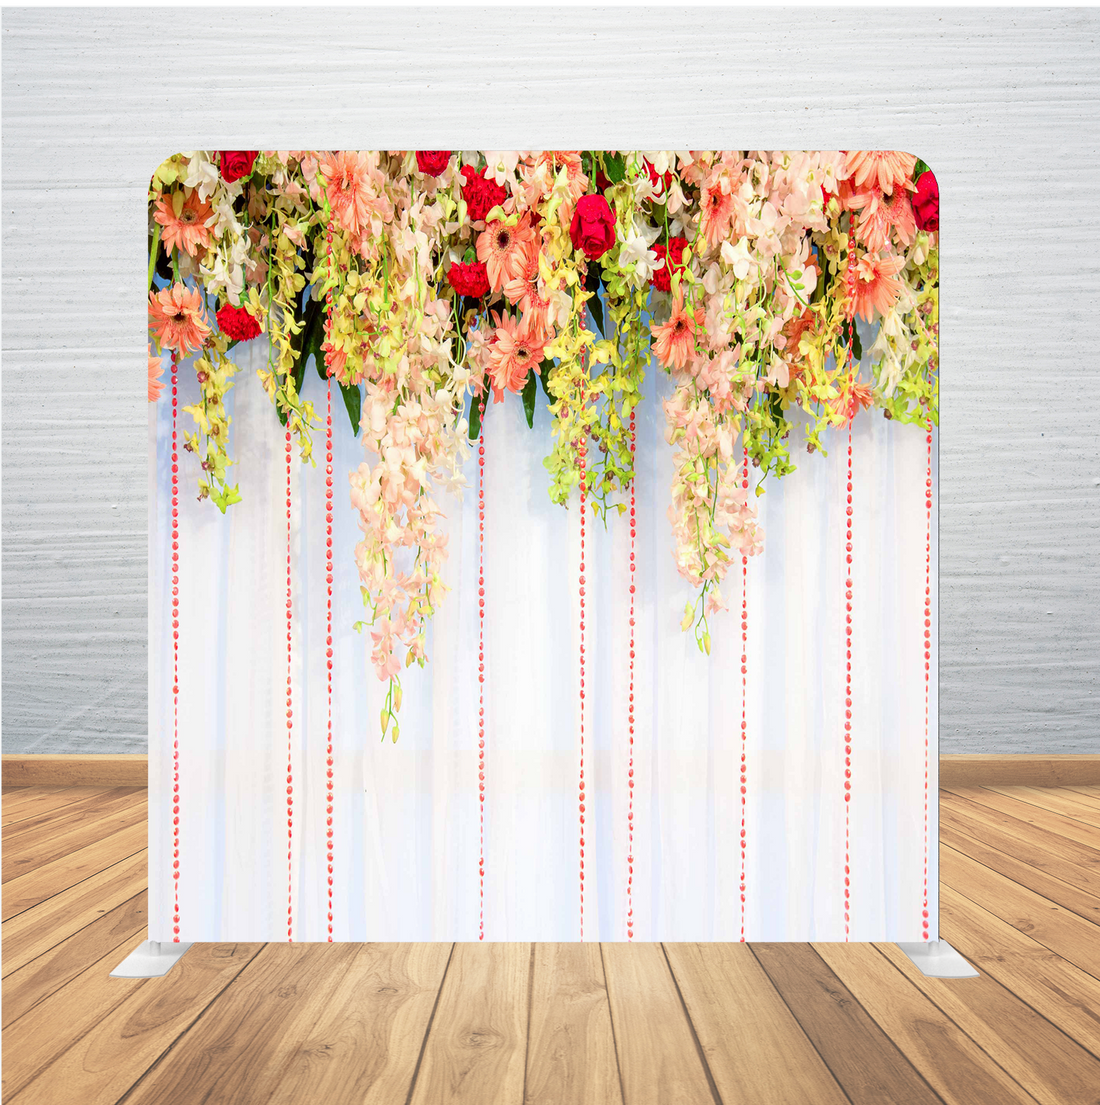 8X8 Pillowcase Tension Backdrop- Peach Flowers with Light Wood